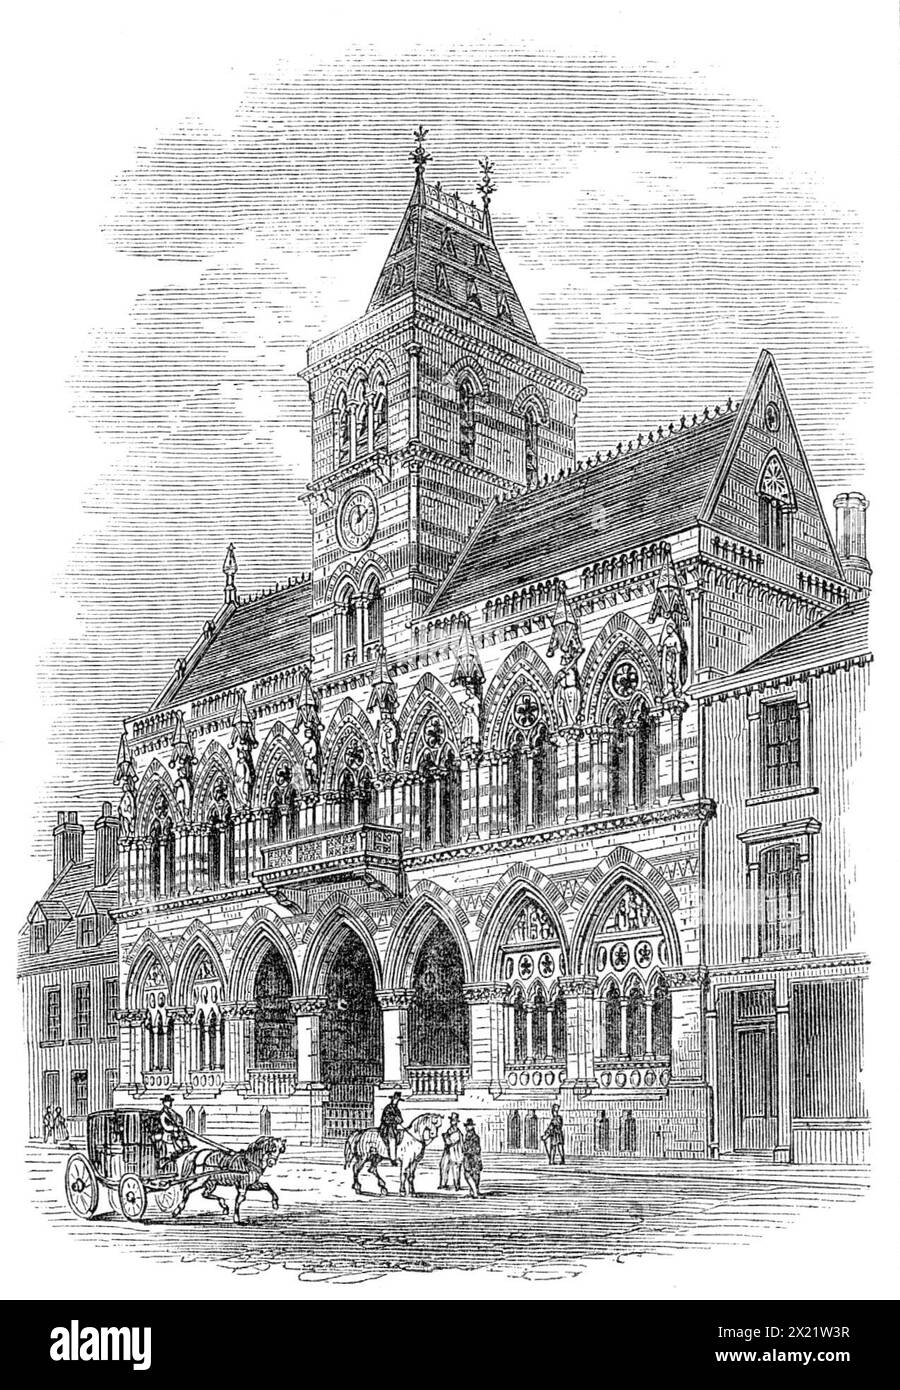 The new townhall of Northampton, 1864. 'The architect of the new hall is Mr. Edwin Godwin, of Bristol; Mr. John Watkin is the builder. The design is of a Gothic style, as appears from our Illustration. The statues, furnished by Mr. Boulton, of Worcester, which adorn the front of the edifice, represent St. George, St. Michael, Richard I., Henry III., Edward I., Edward IV., Henry VII., and Queen Victoria. There are sculptured groups of subjects from English history on the arches of the lower windows, and many other decorations, which our limited space will not allow us to describe. Upon the whol Stock Photo